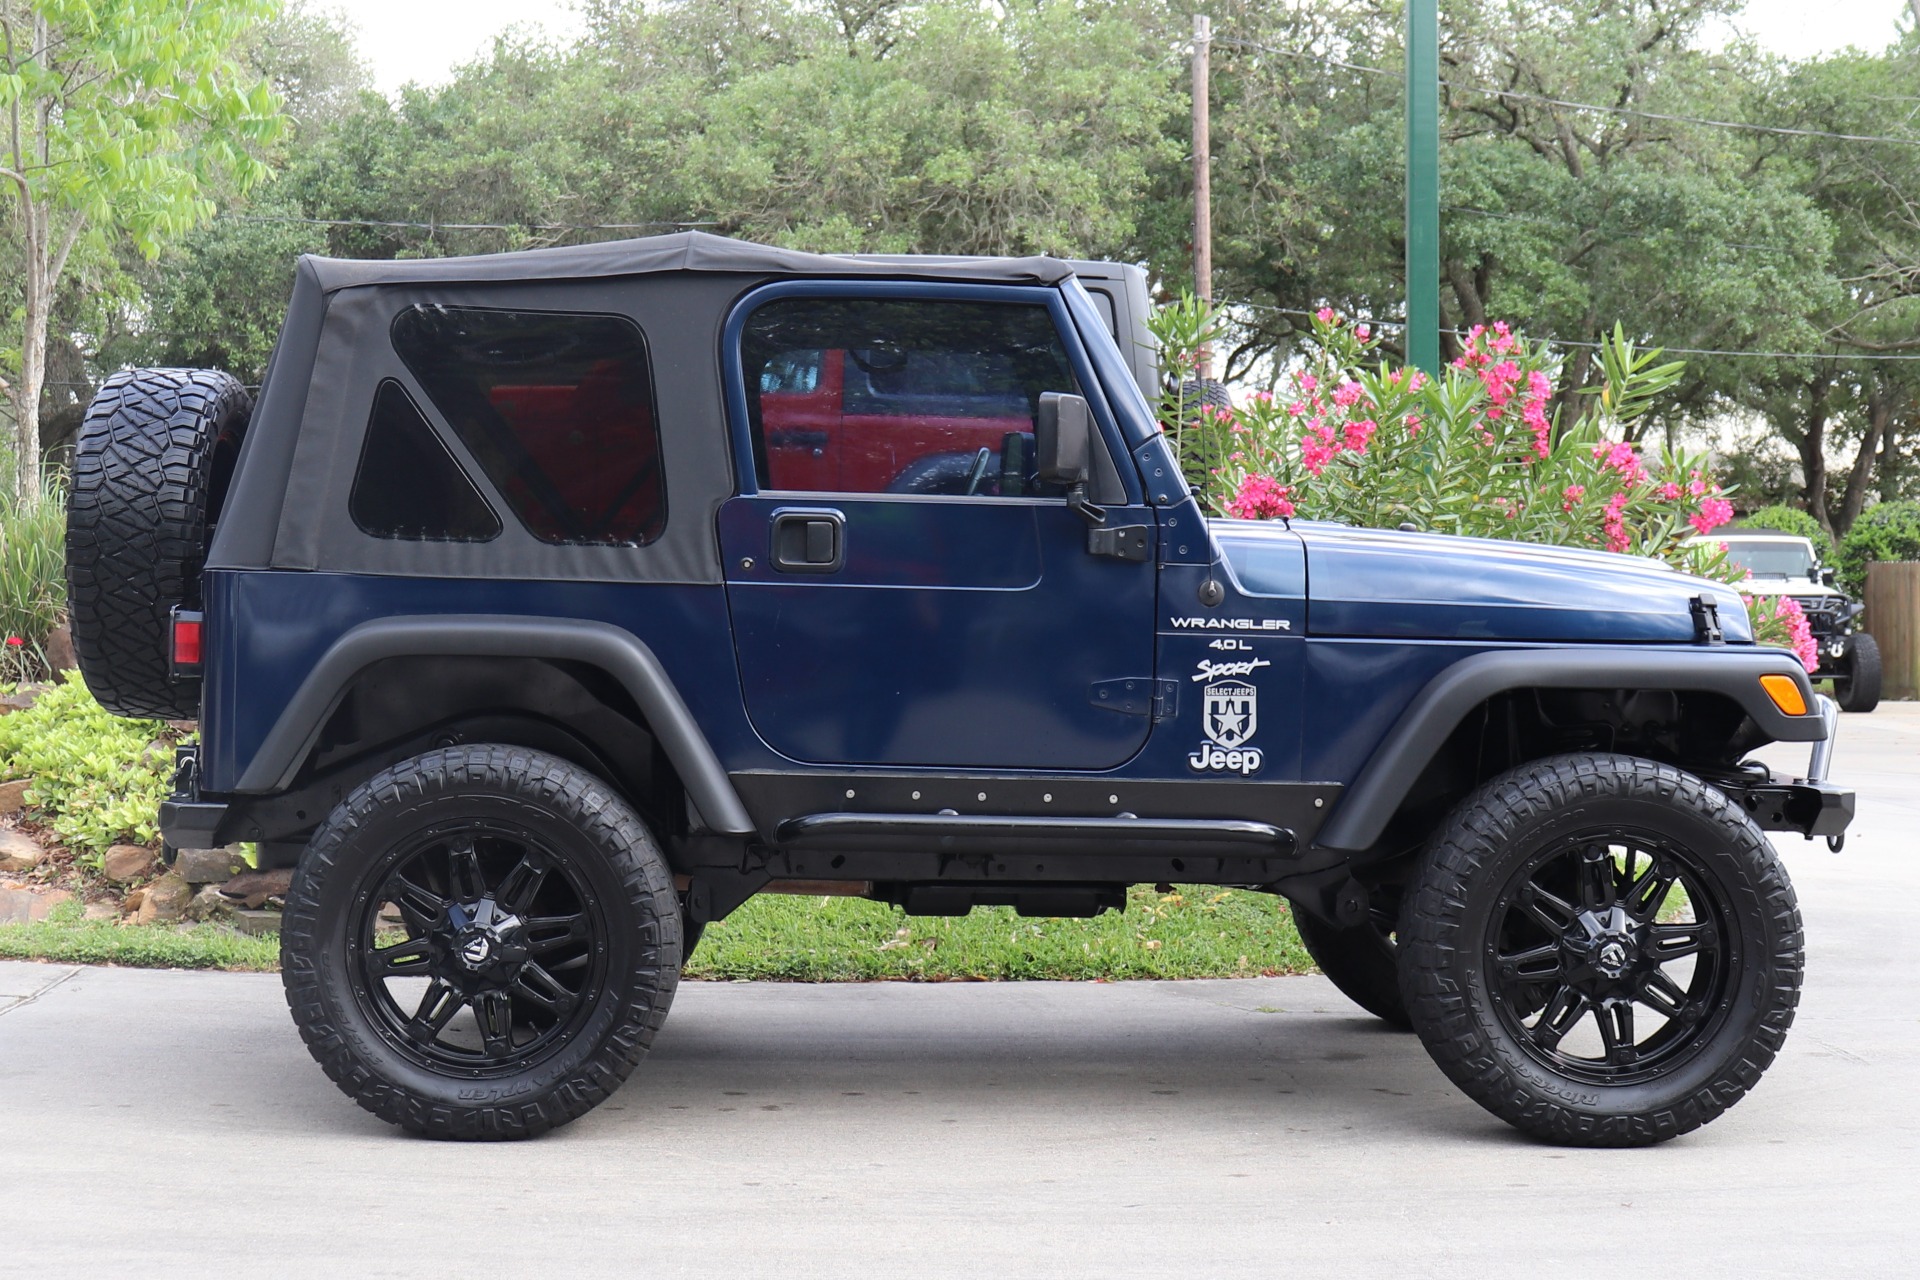 Used 2000 Jeep Wrangler Sport For Sale (Special Pricing) | Select Jeeps  Inc. Stock #777306